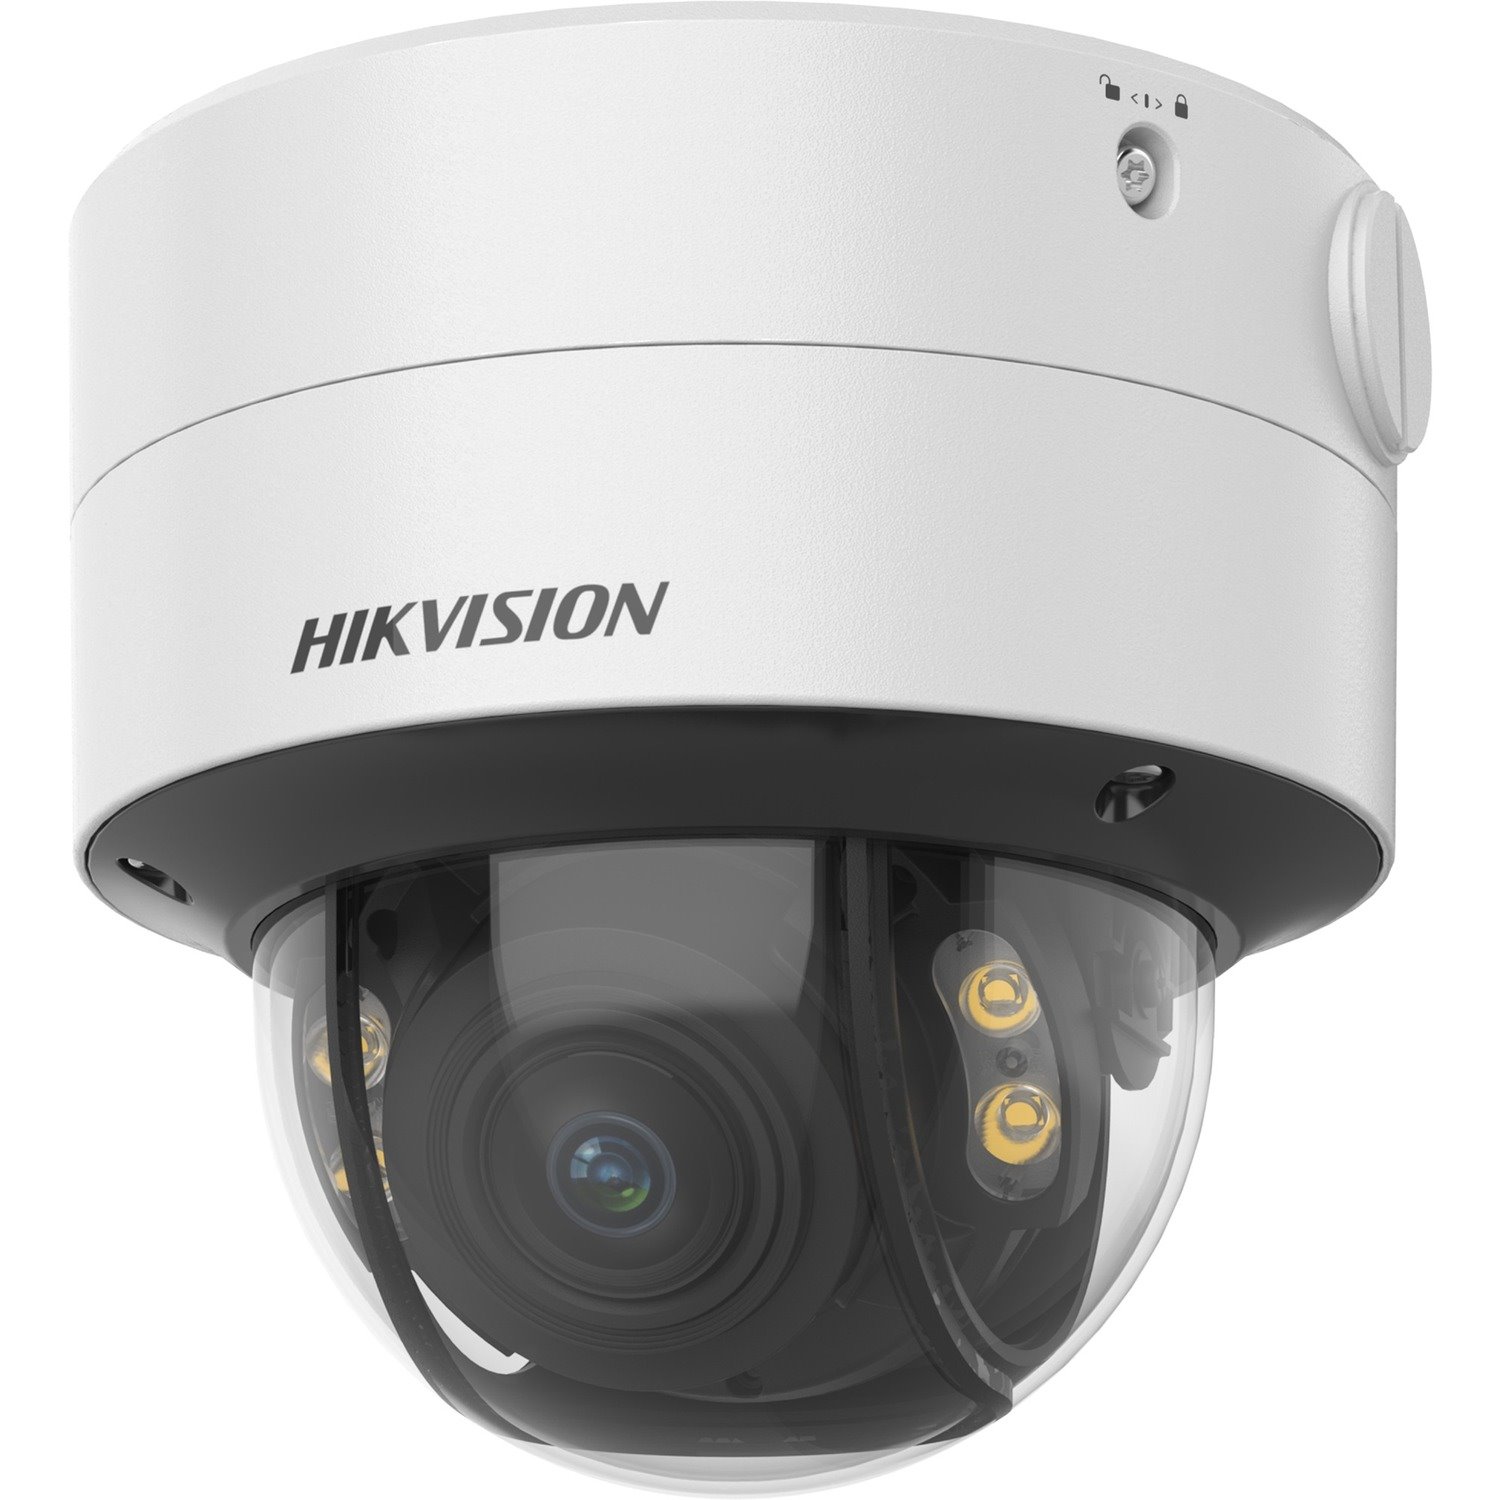 Hikvision Performance DS-2CD2747G2T-LZS 4 Megapixel Outdoor Network Camera - Color - Dome